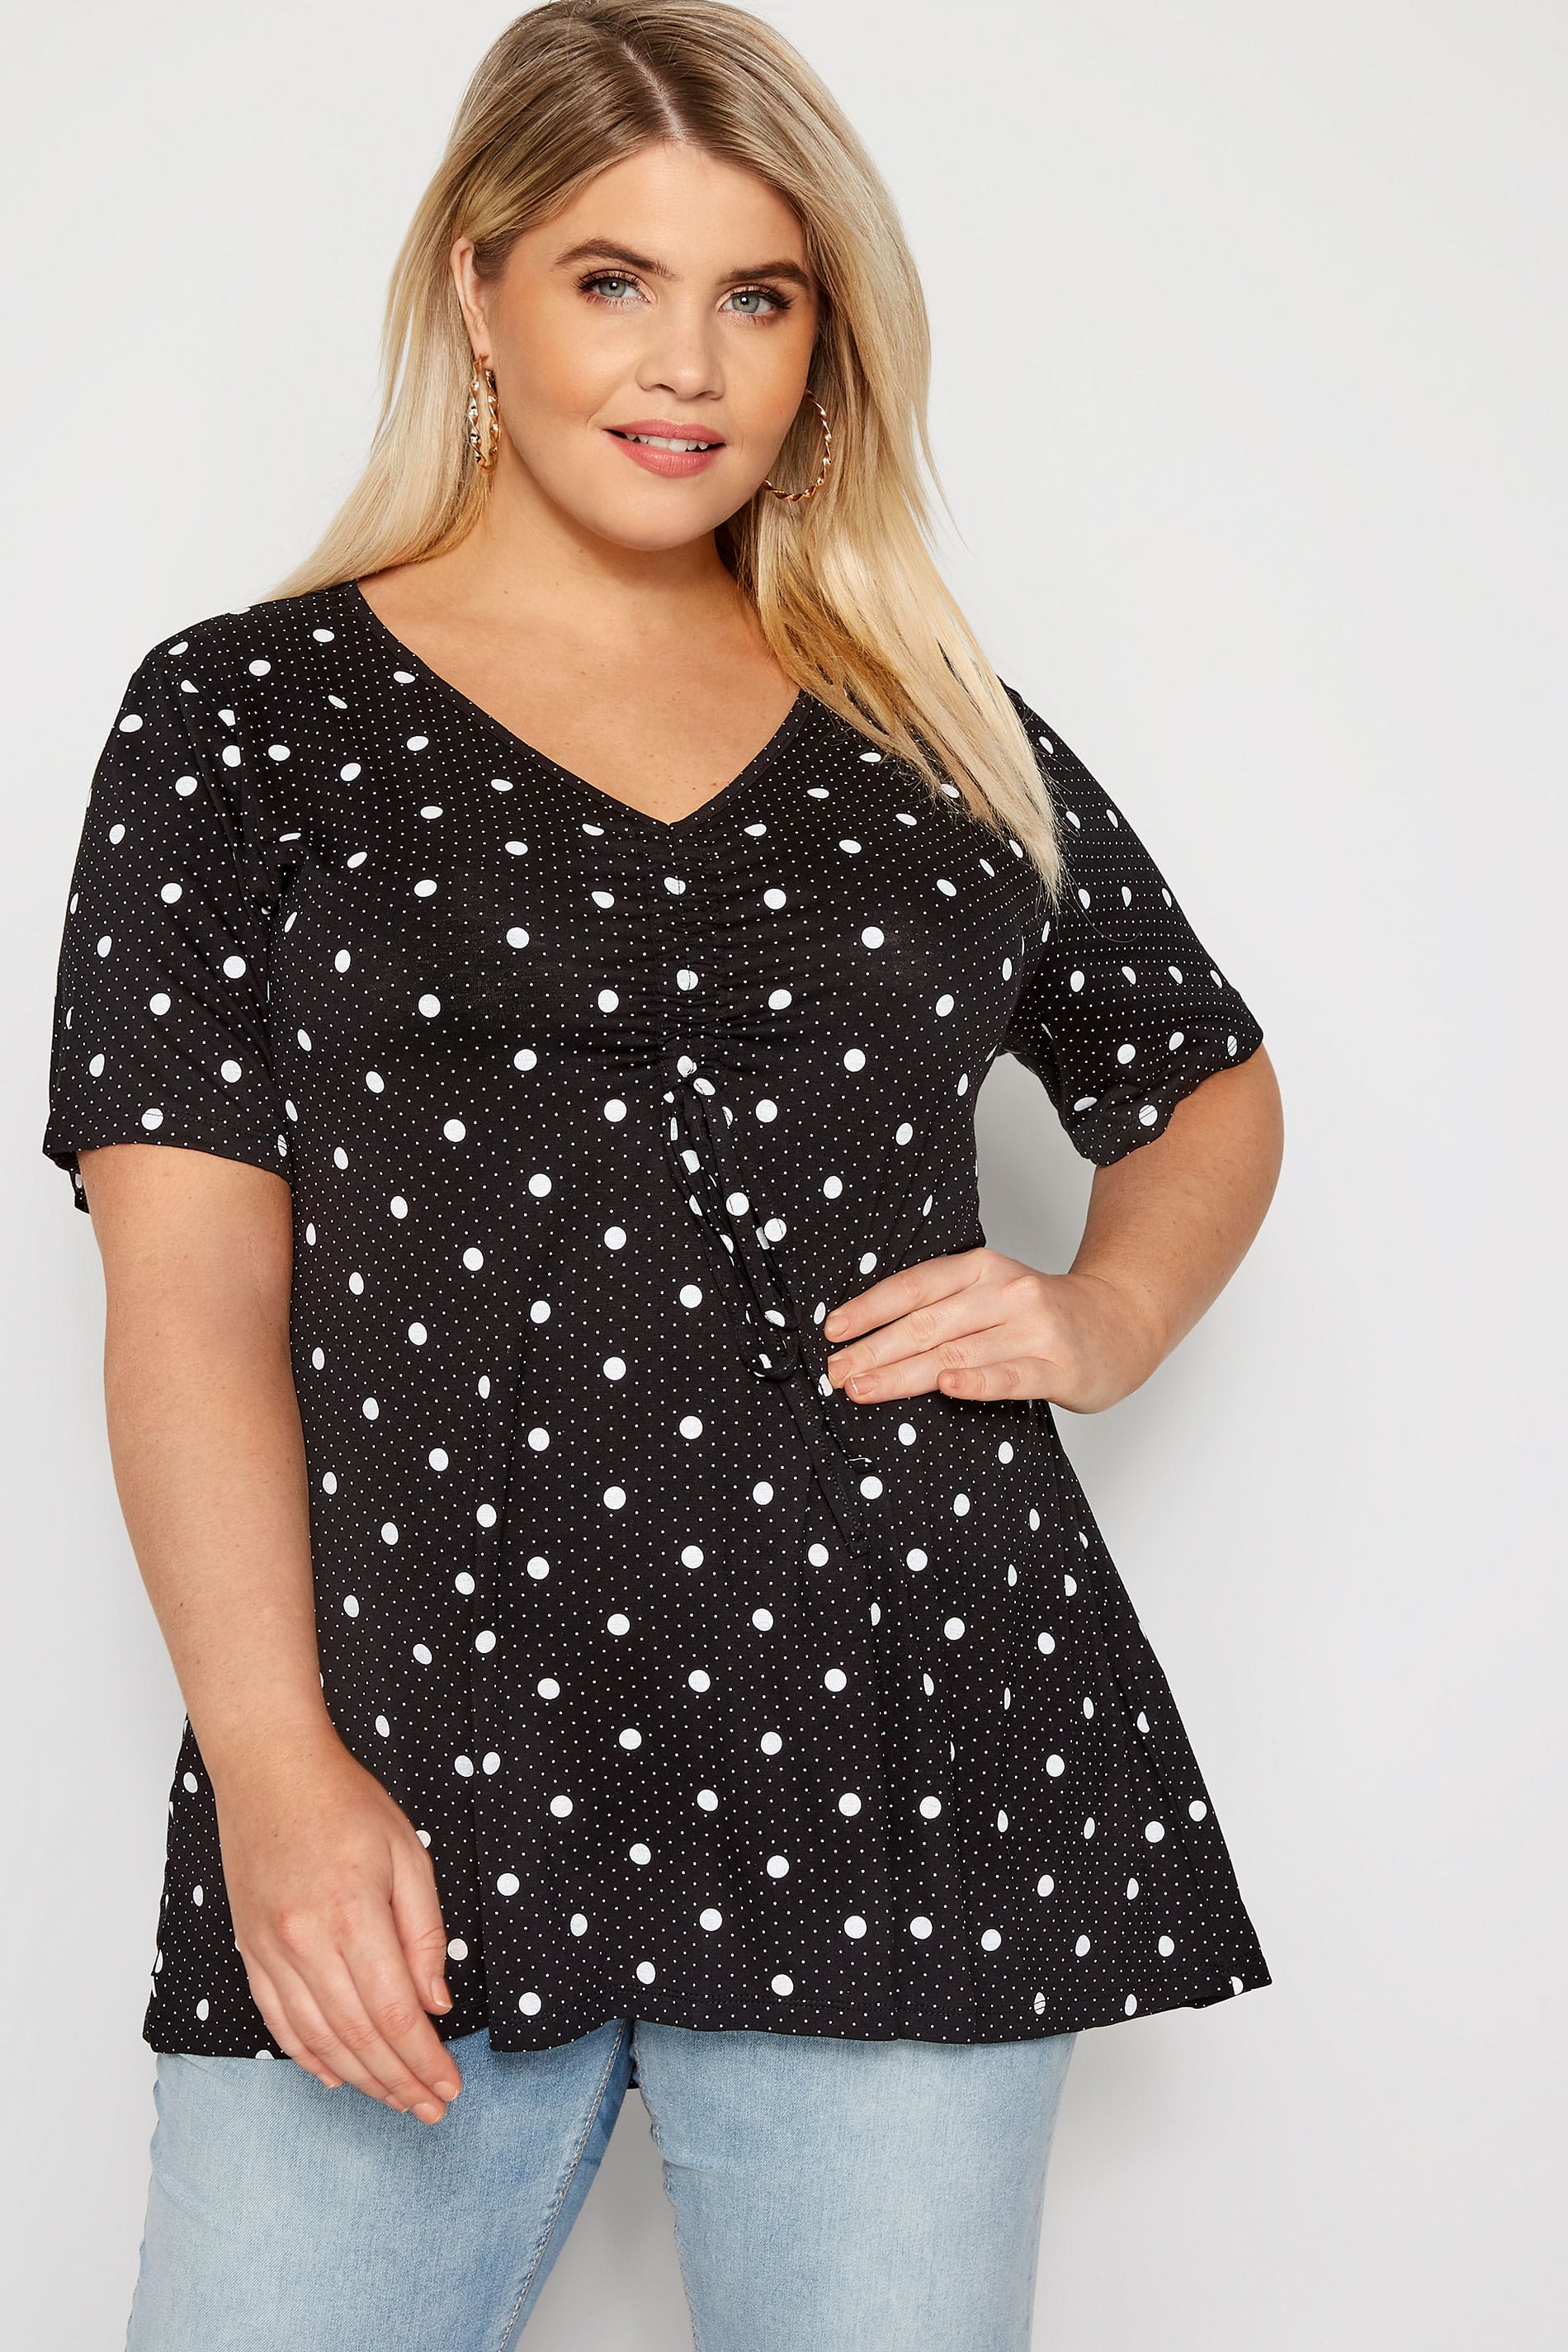 Black Polka Dot Ruched Front Top | Plus Sizes 16 to 40 | Yours Clothing